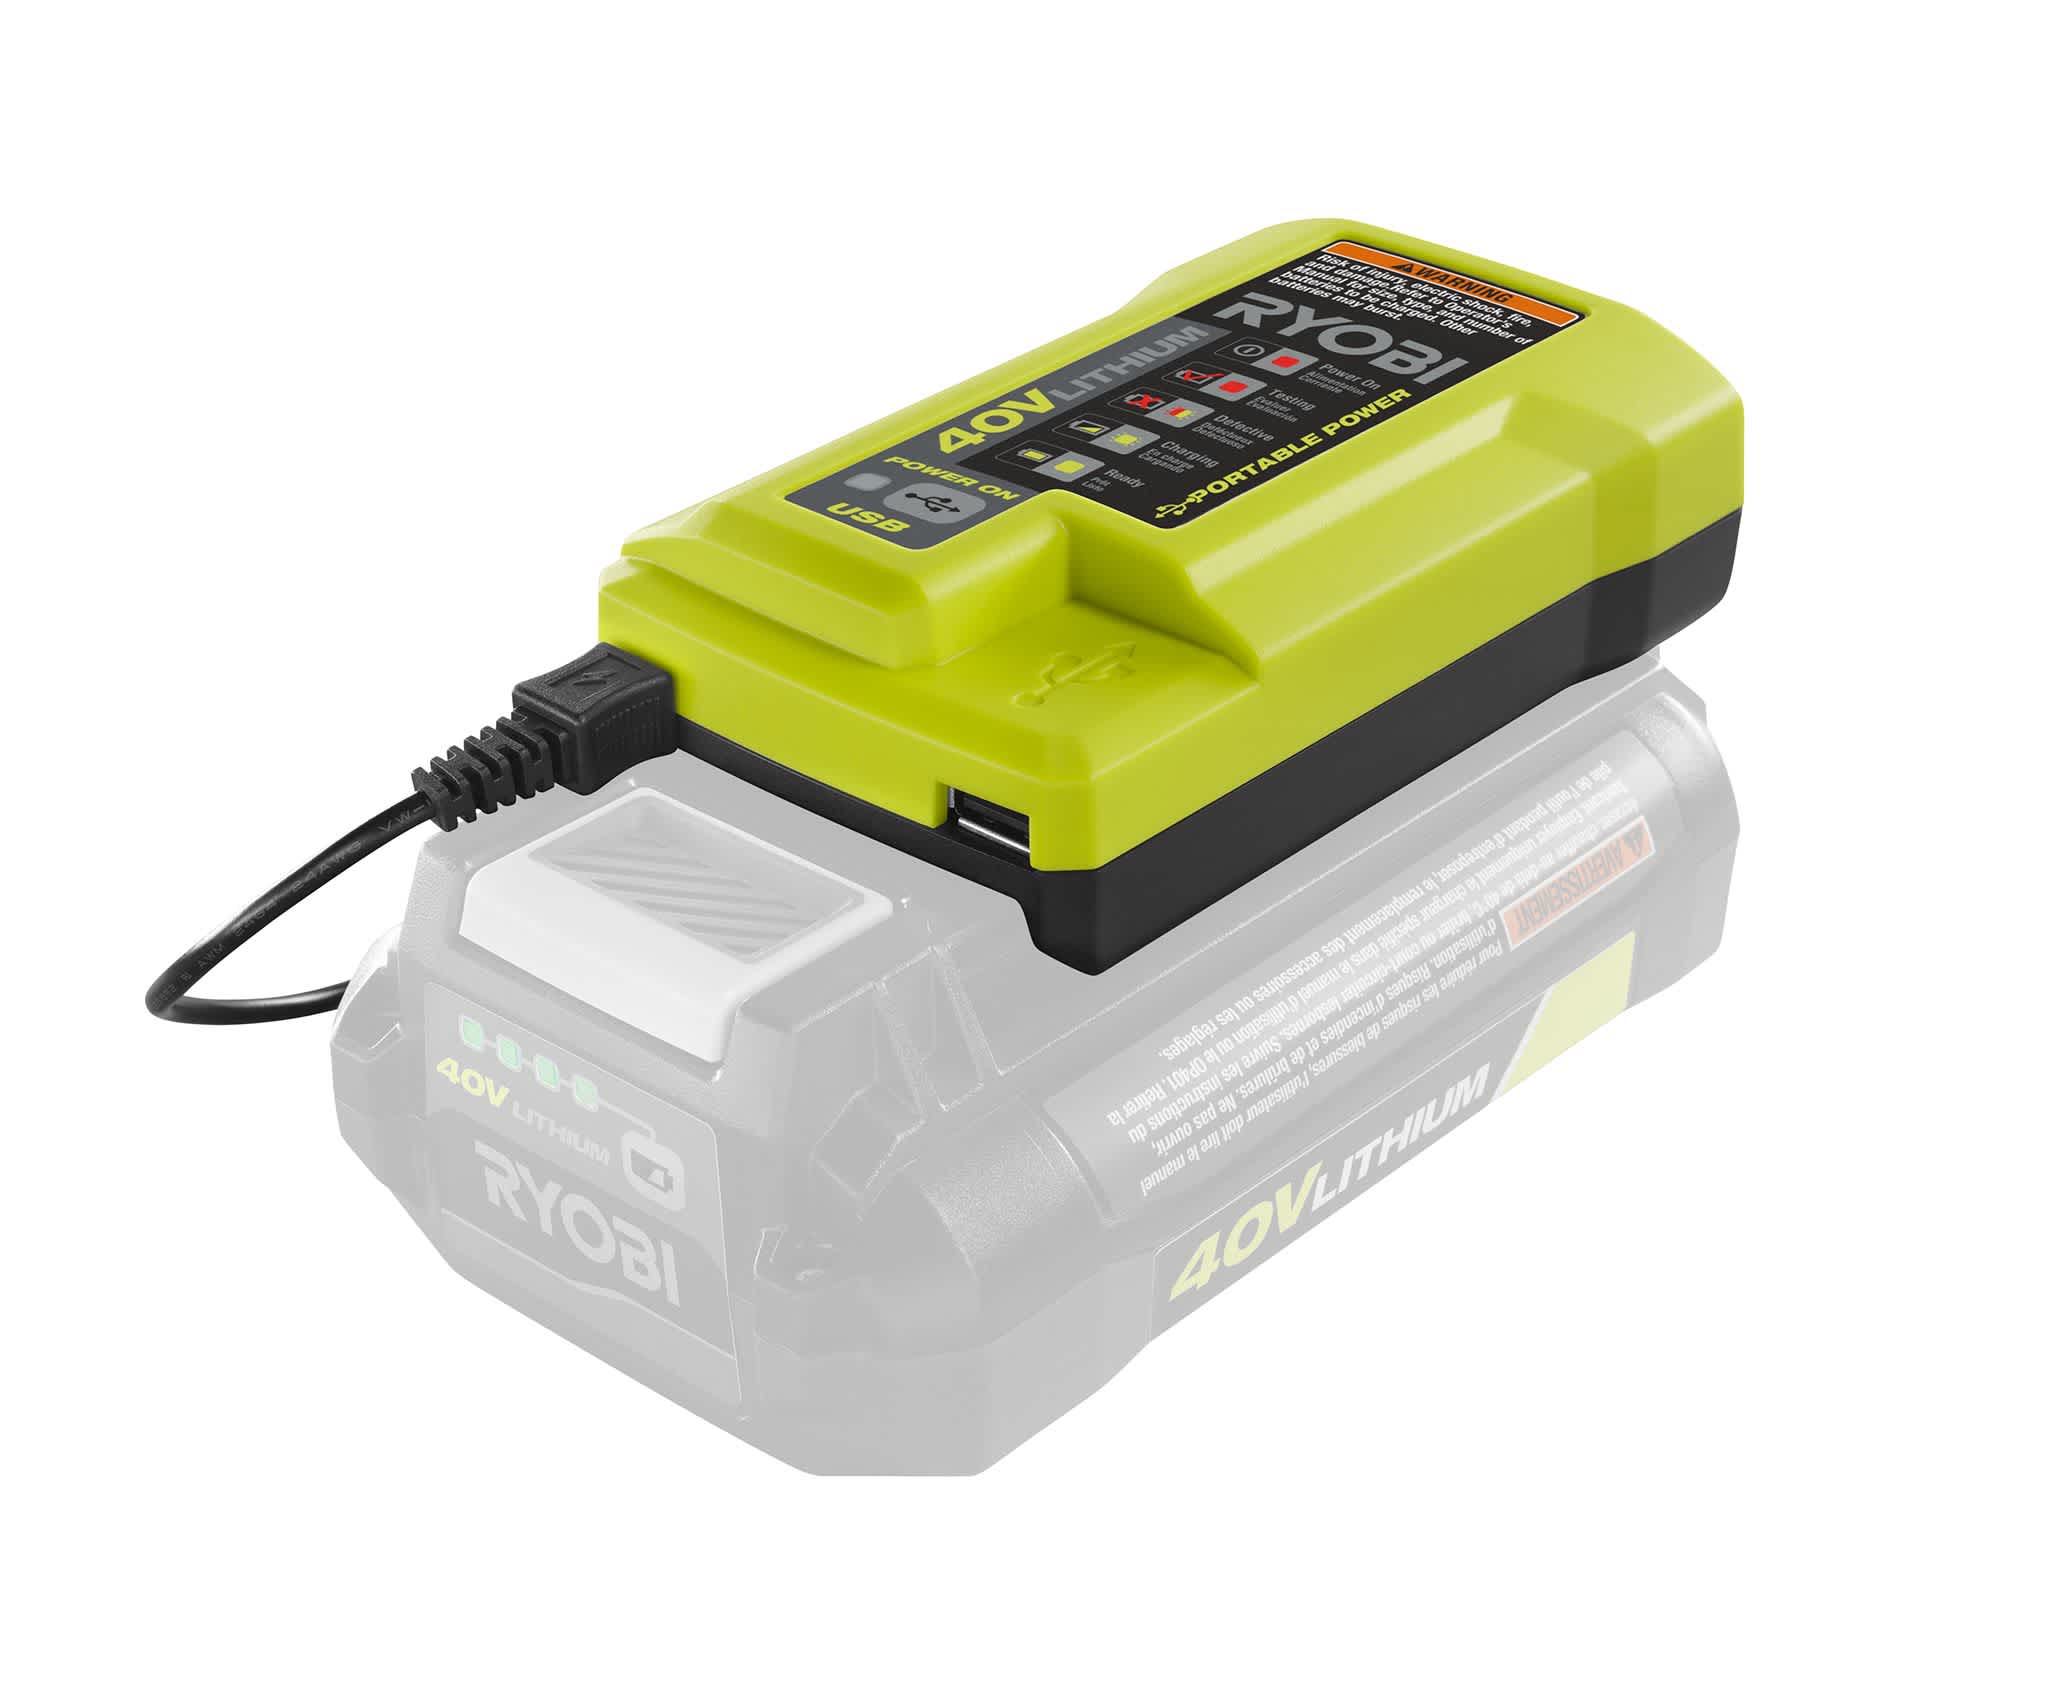 Product Features Image for 40V LITHIUM-ION 6.0AH HIGH CAPACITY BATTERY AND CHARGER KIT.